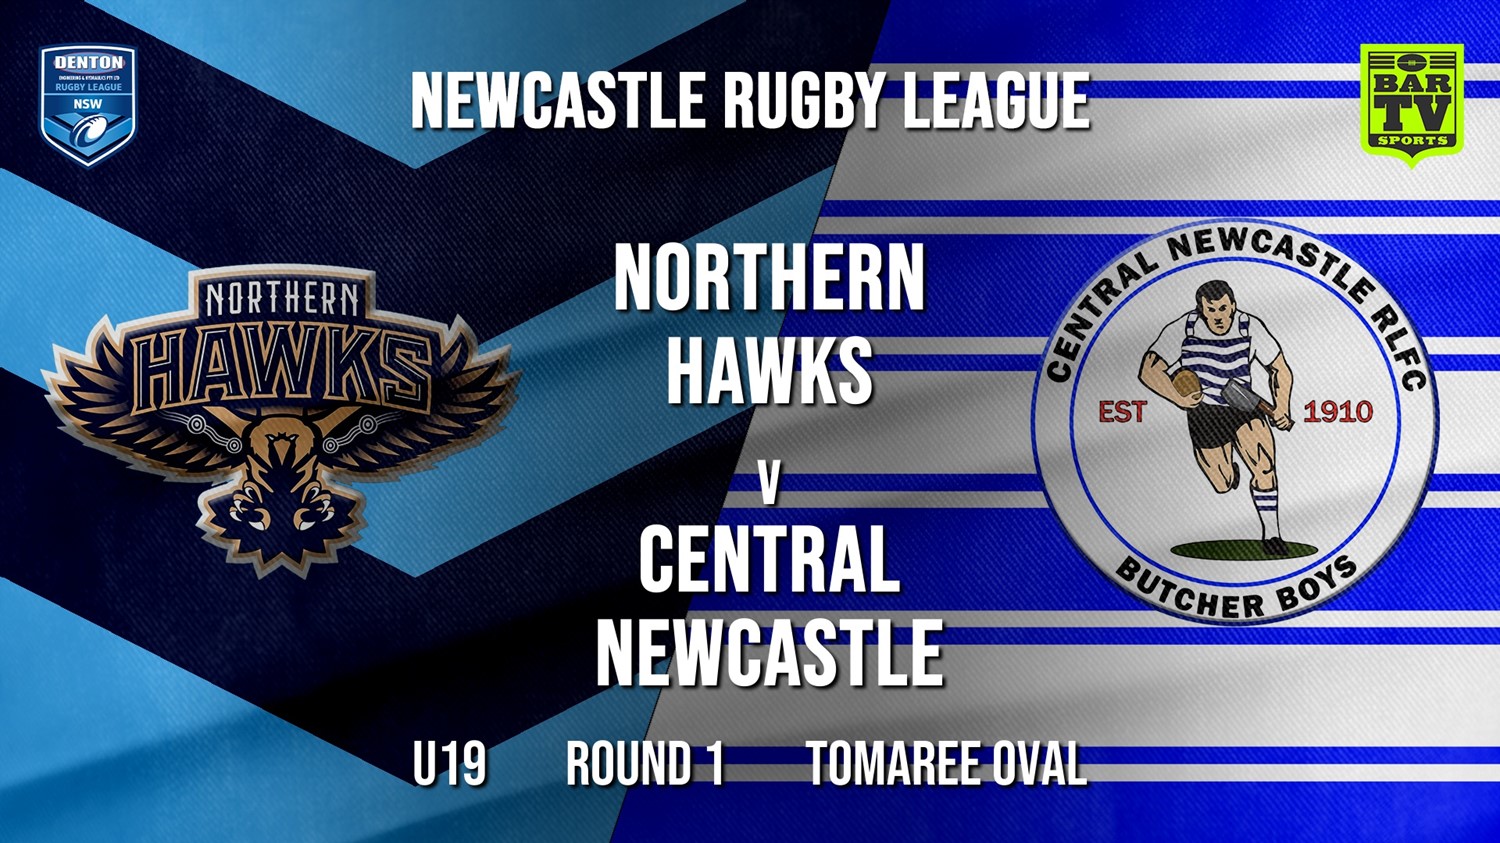 Newcastle Rugby League Round 1 - U19 - Northern Hawks v Central Newcastle Slate Image